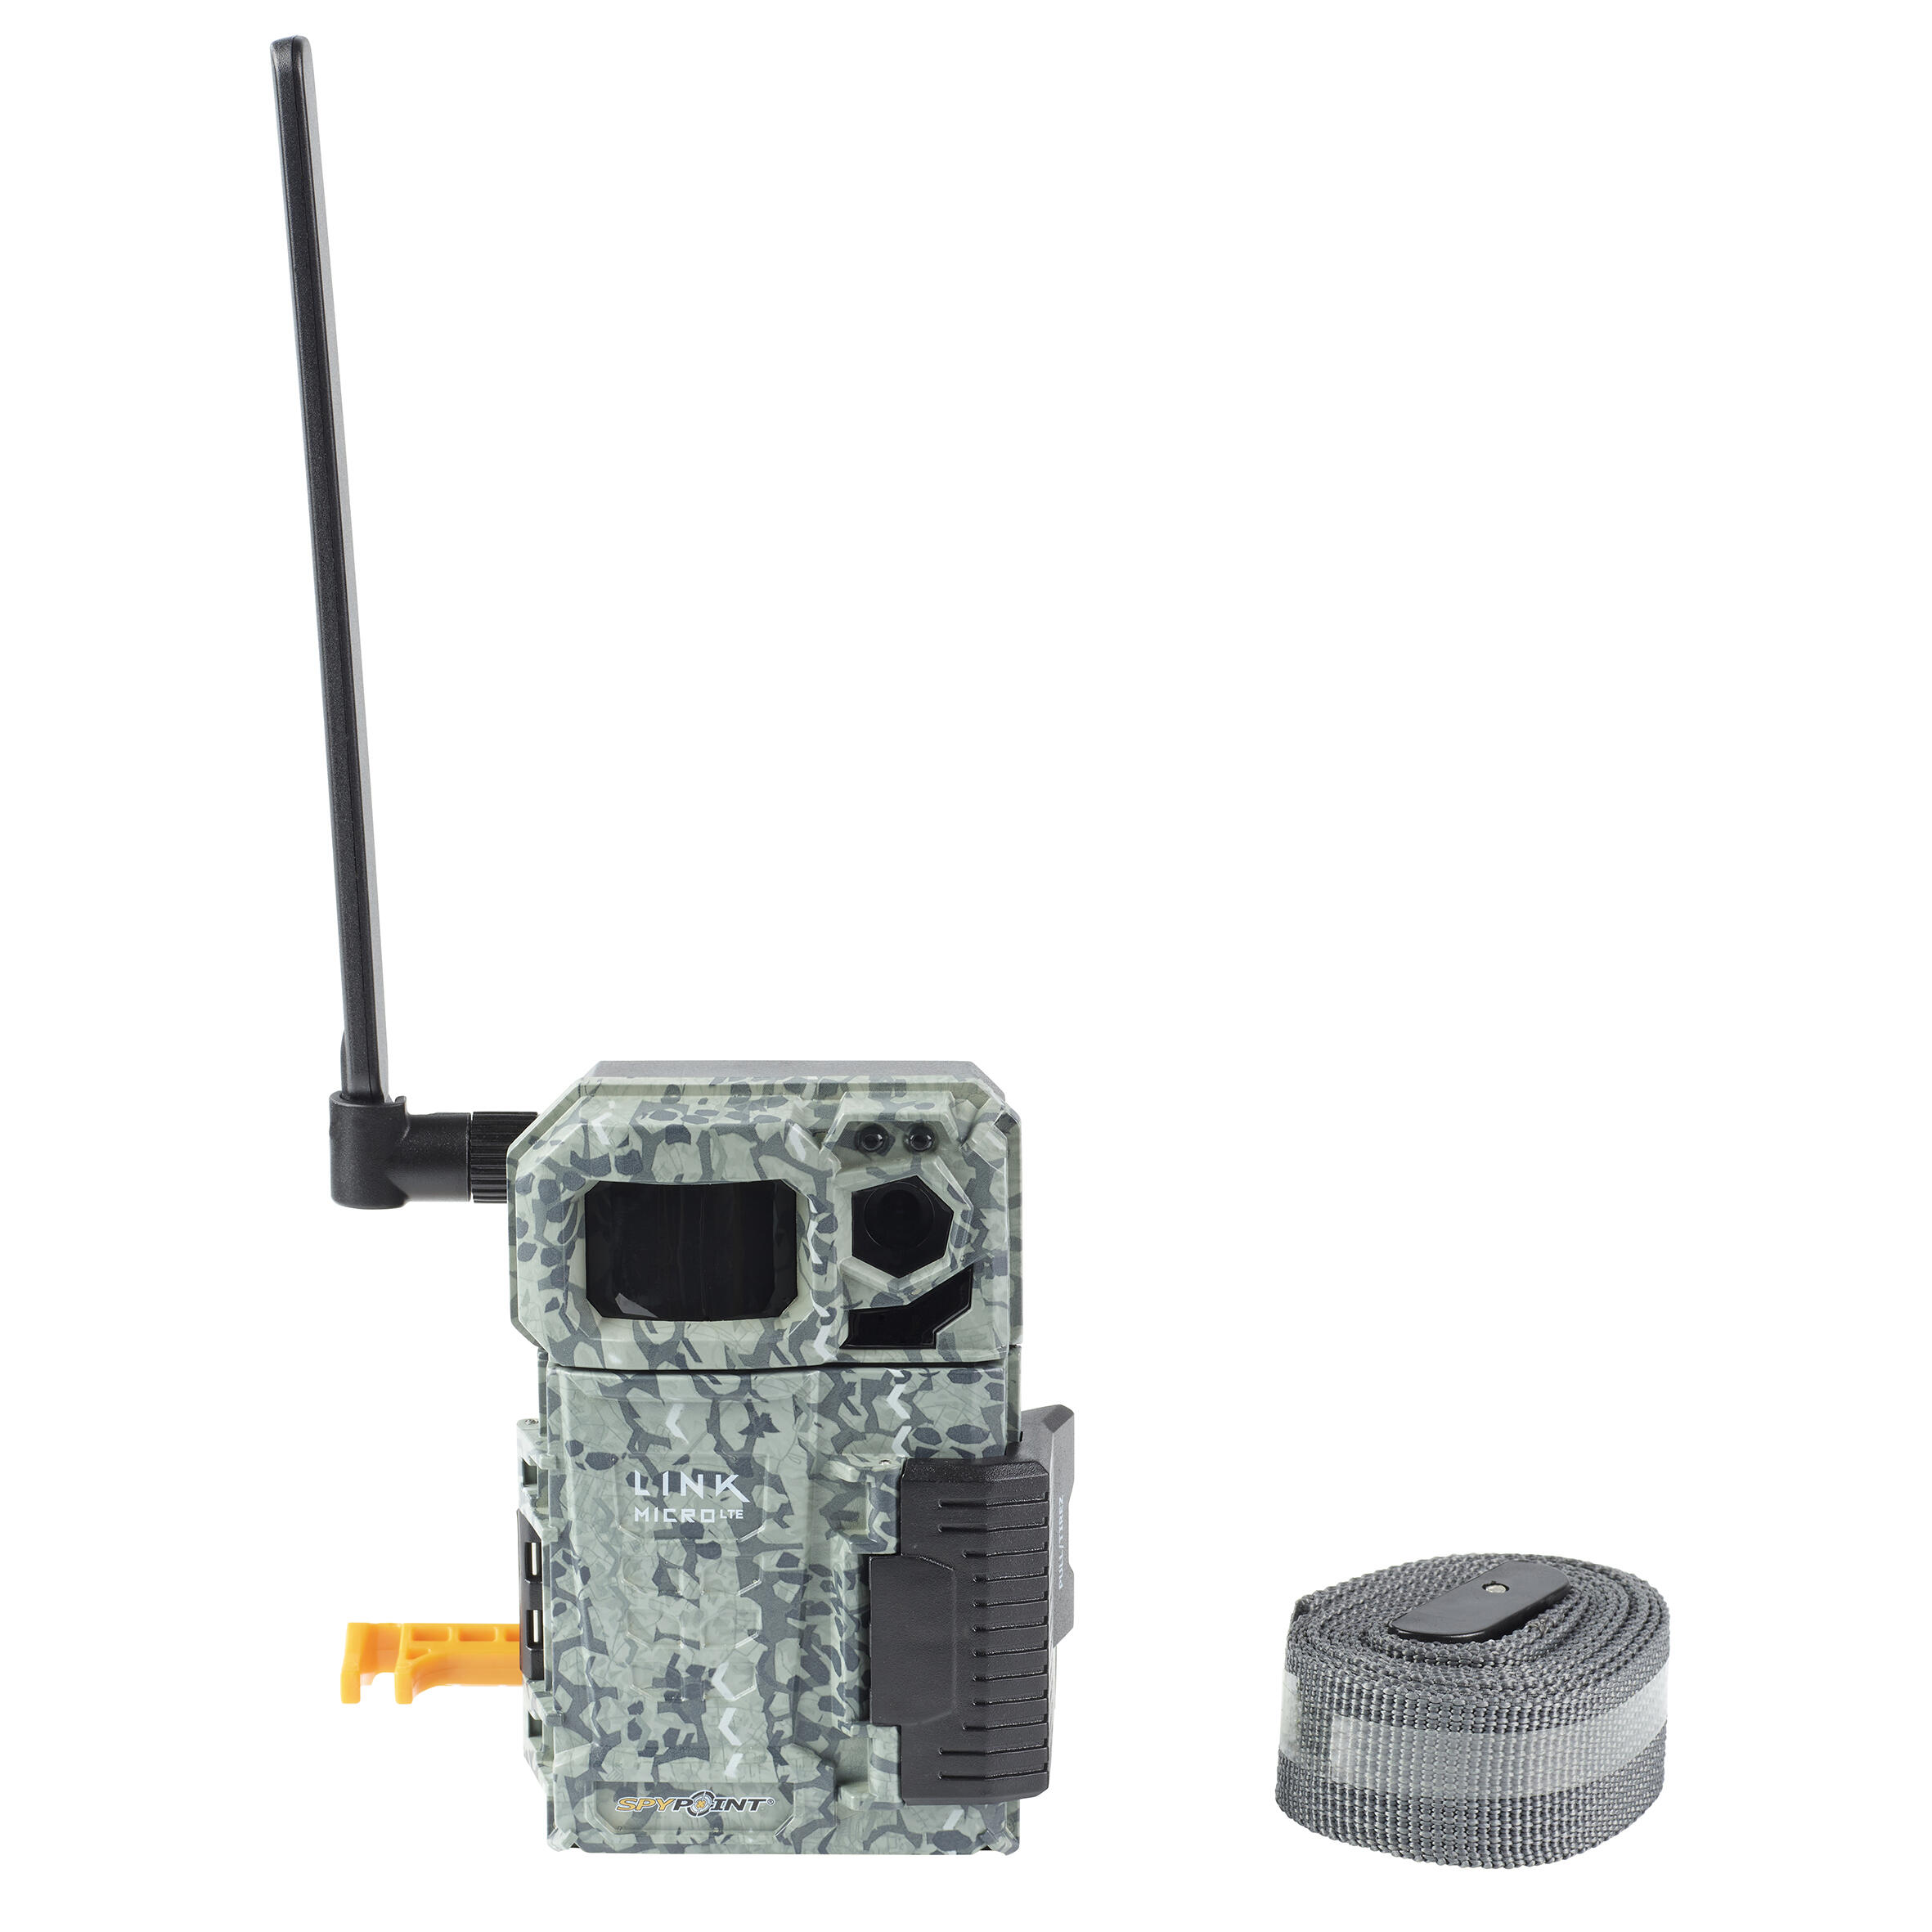 CAMERA LINK MICRO LTE SPYPOINT LINK MICRO SPYPOINT decathlon.ro